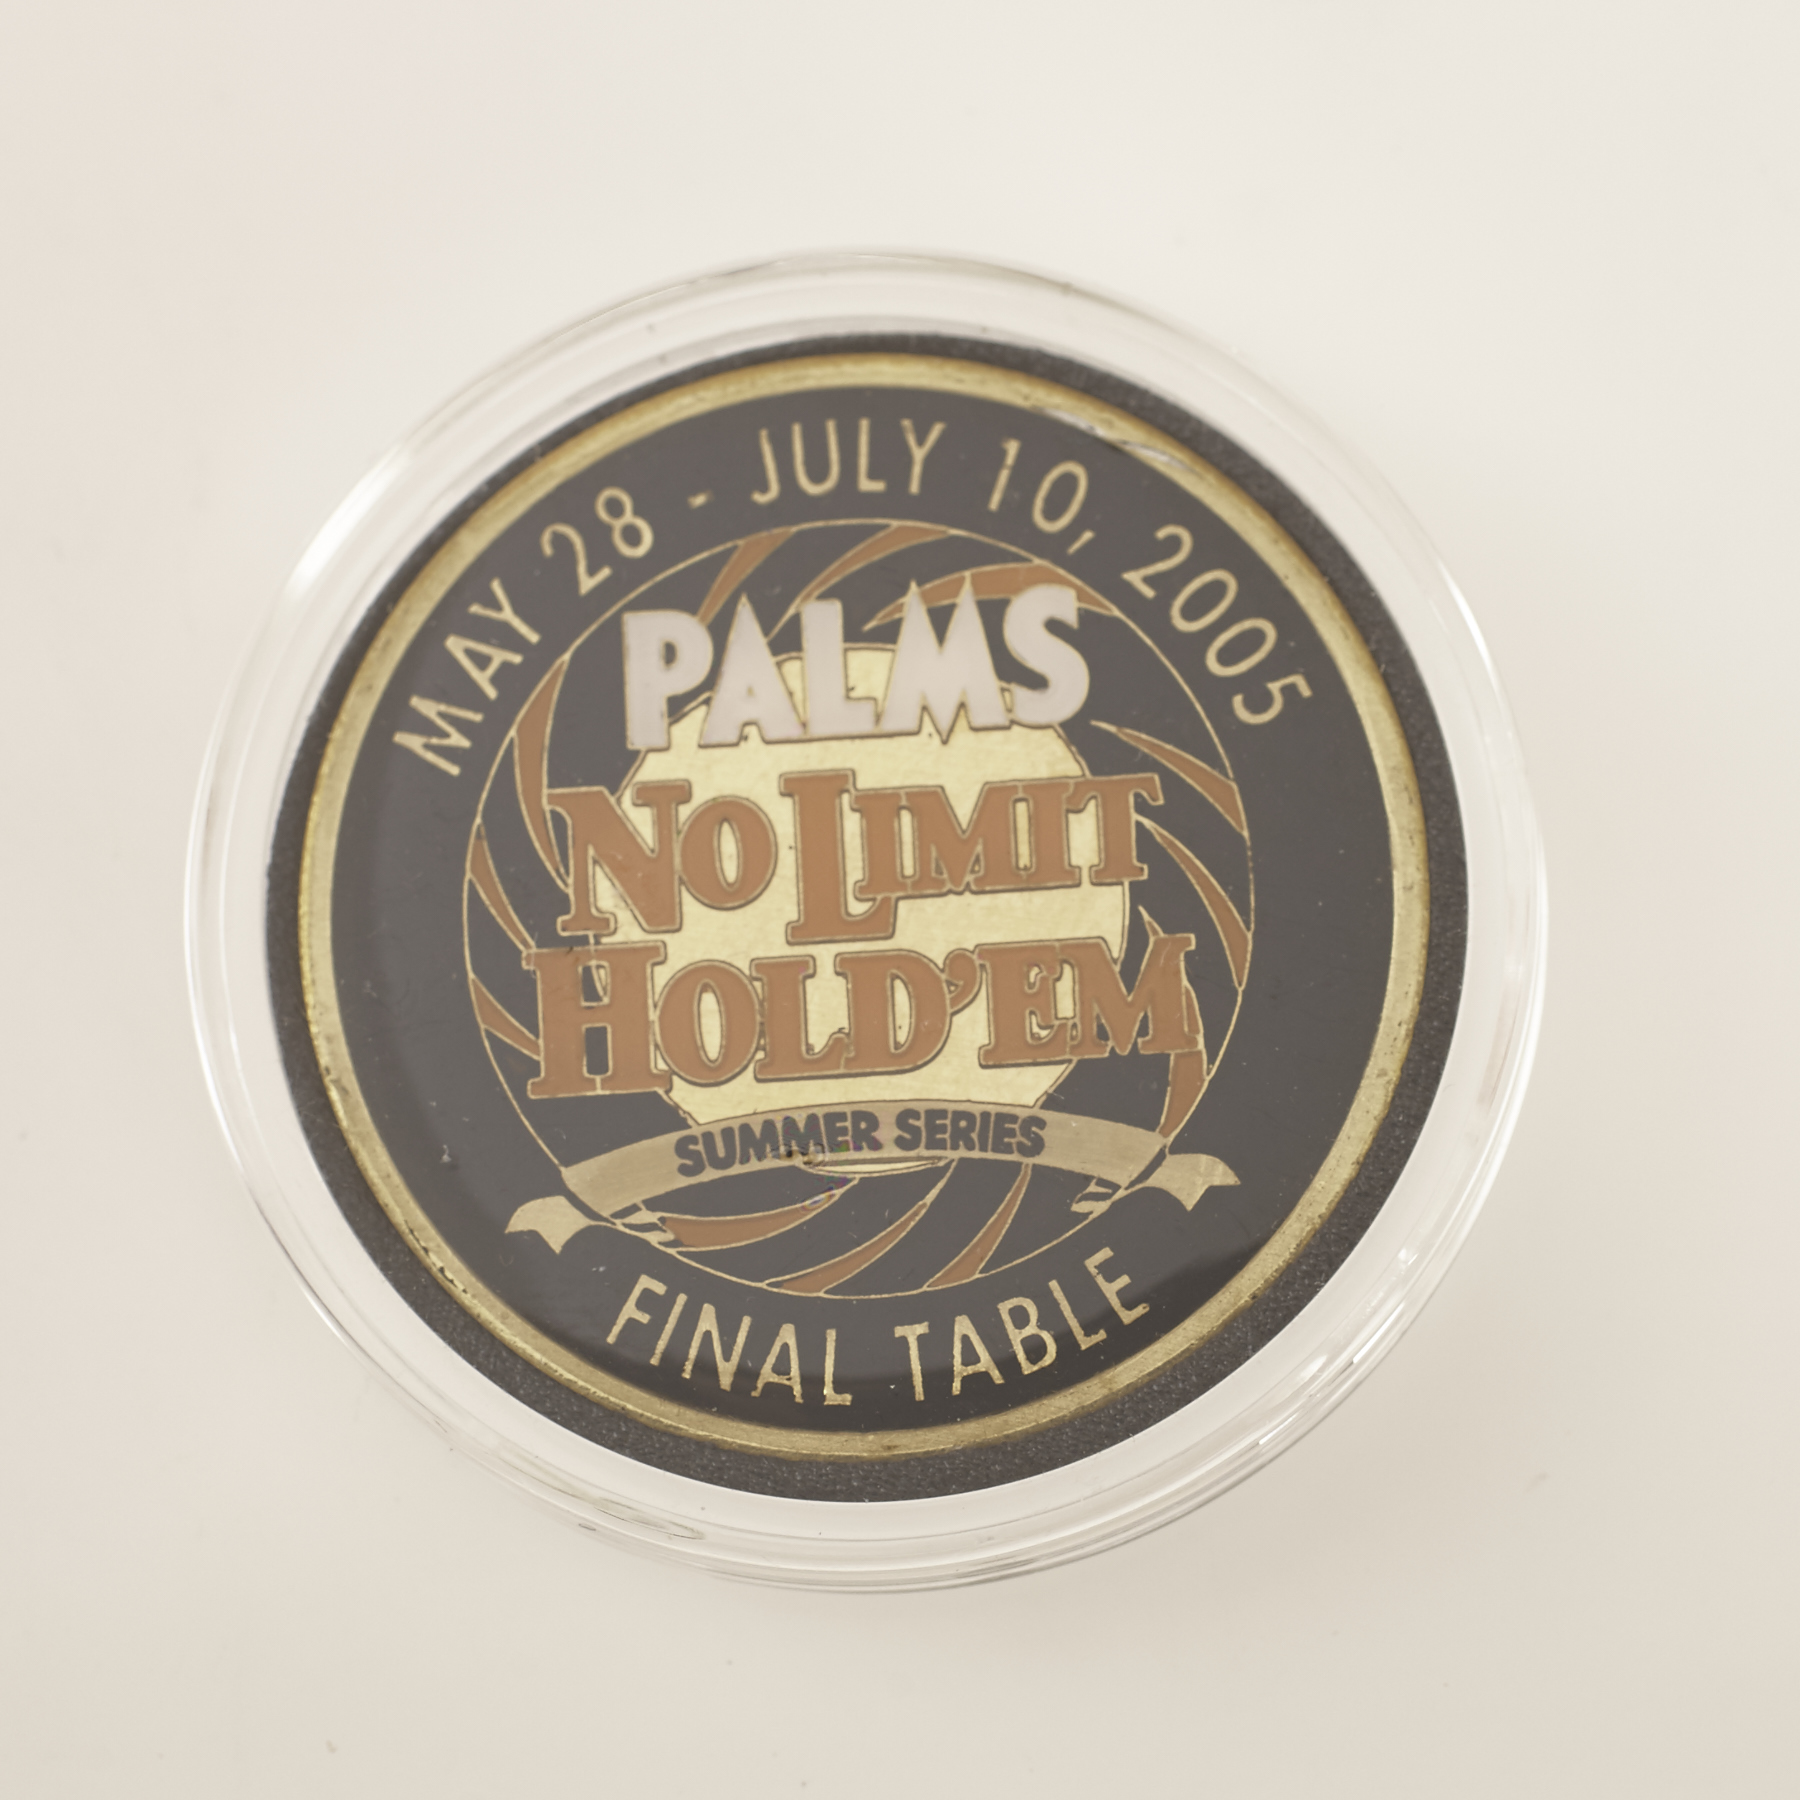 PALMS NO LIMIT HOLD’EM, SUMMER SERIES, FINAL TABLE, Poker Card Guard